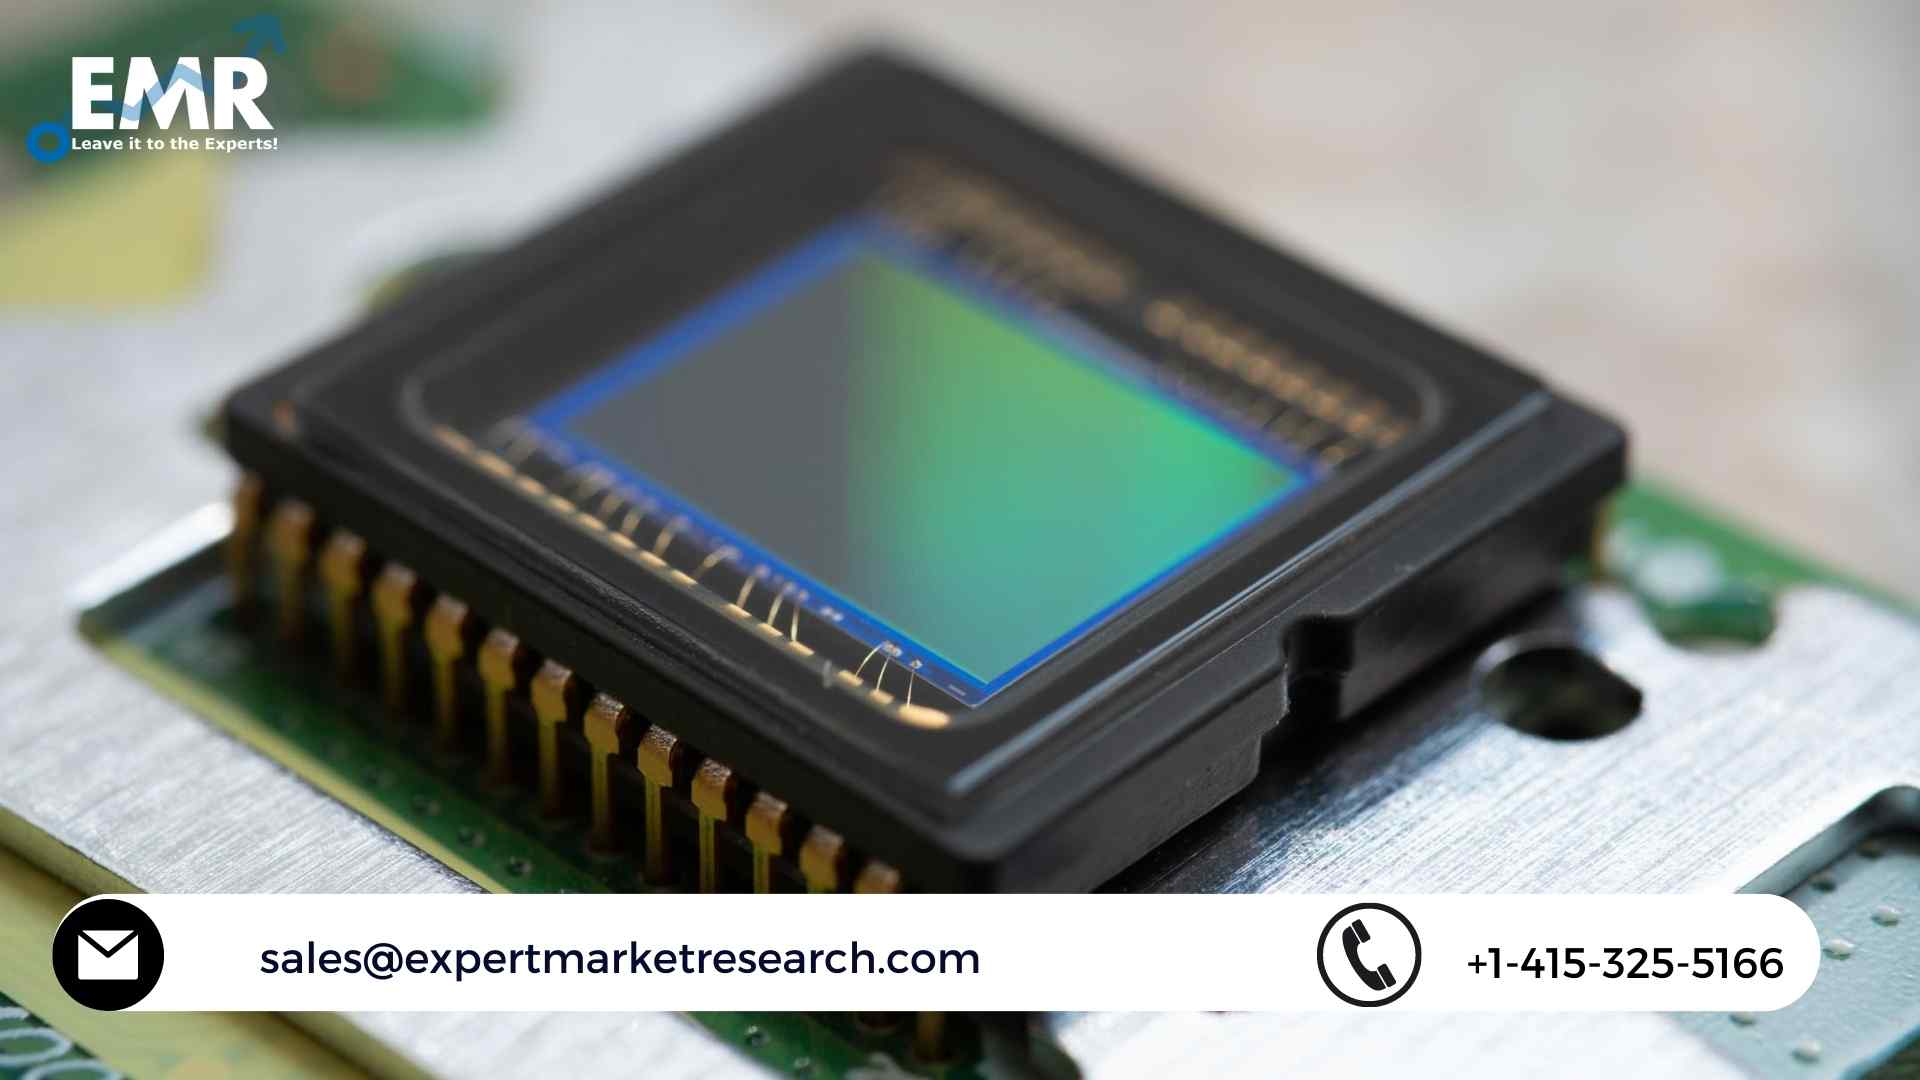 Global Industrial Sensors Market Size To Grow At A CAGR Of 9.3% In The Forecast Period Of 2023-2028 | EMR Inc.